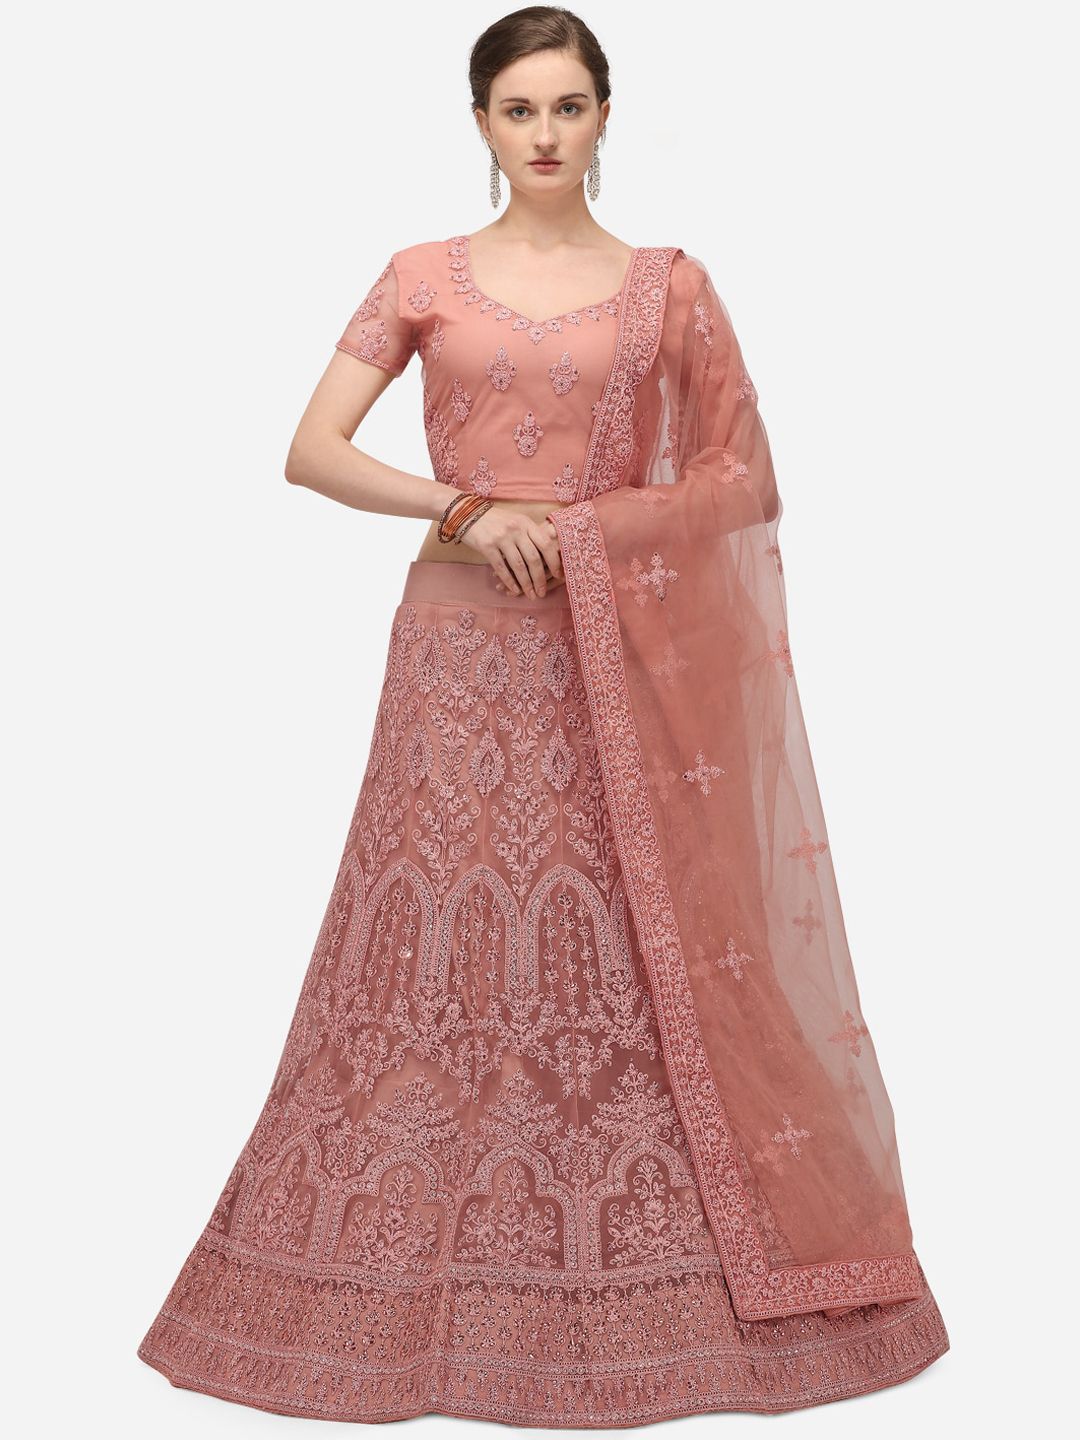 Netram Peach-Coloured Unstitched Lehenga & Blouse with Dupatta Price in India